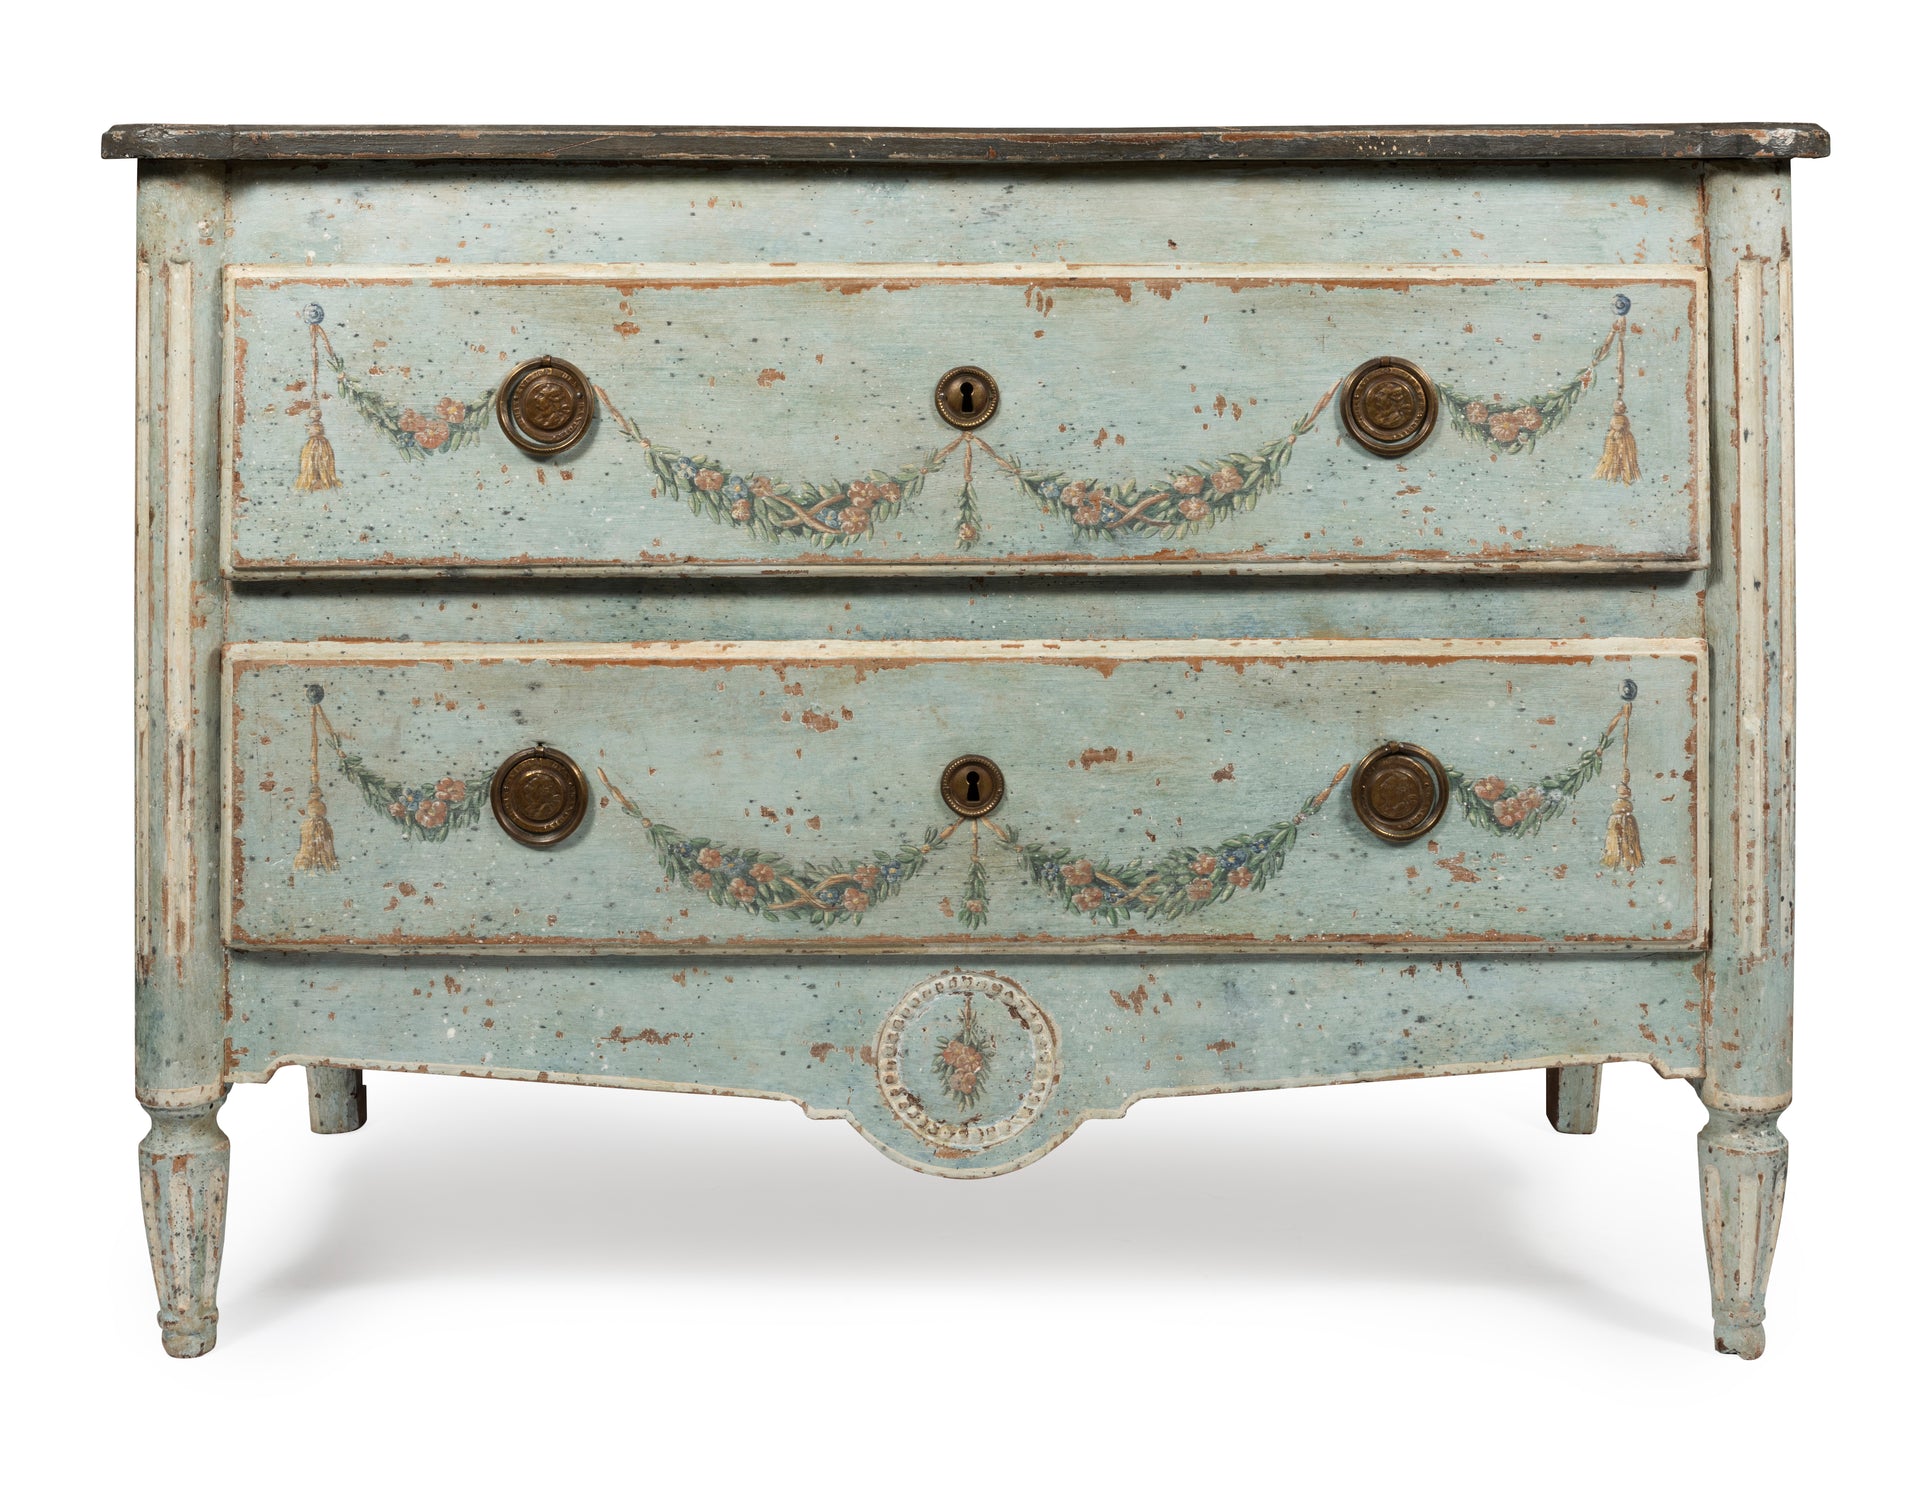 SOLD A beautiful polychrome painted pale blue two drawer commode, Italian 18th Century